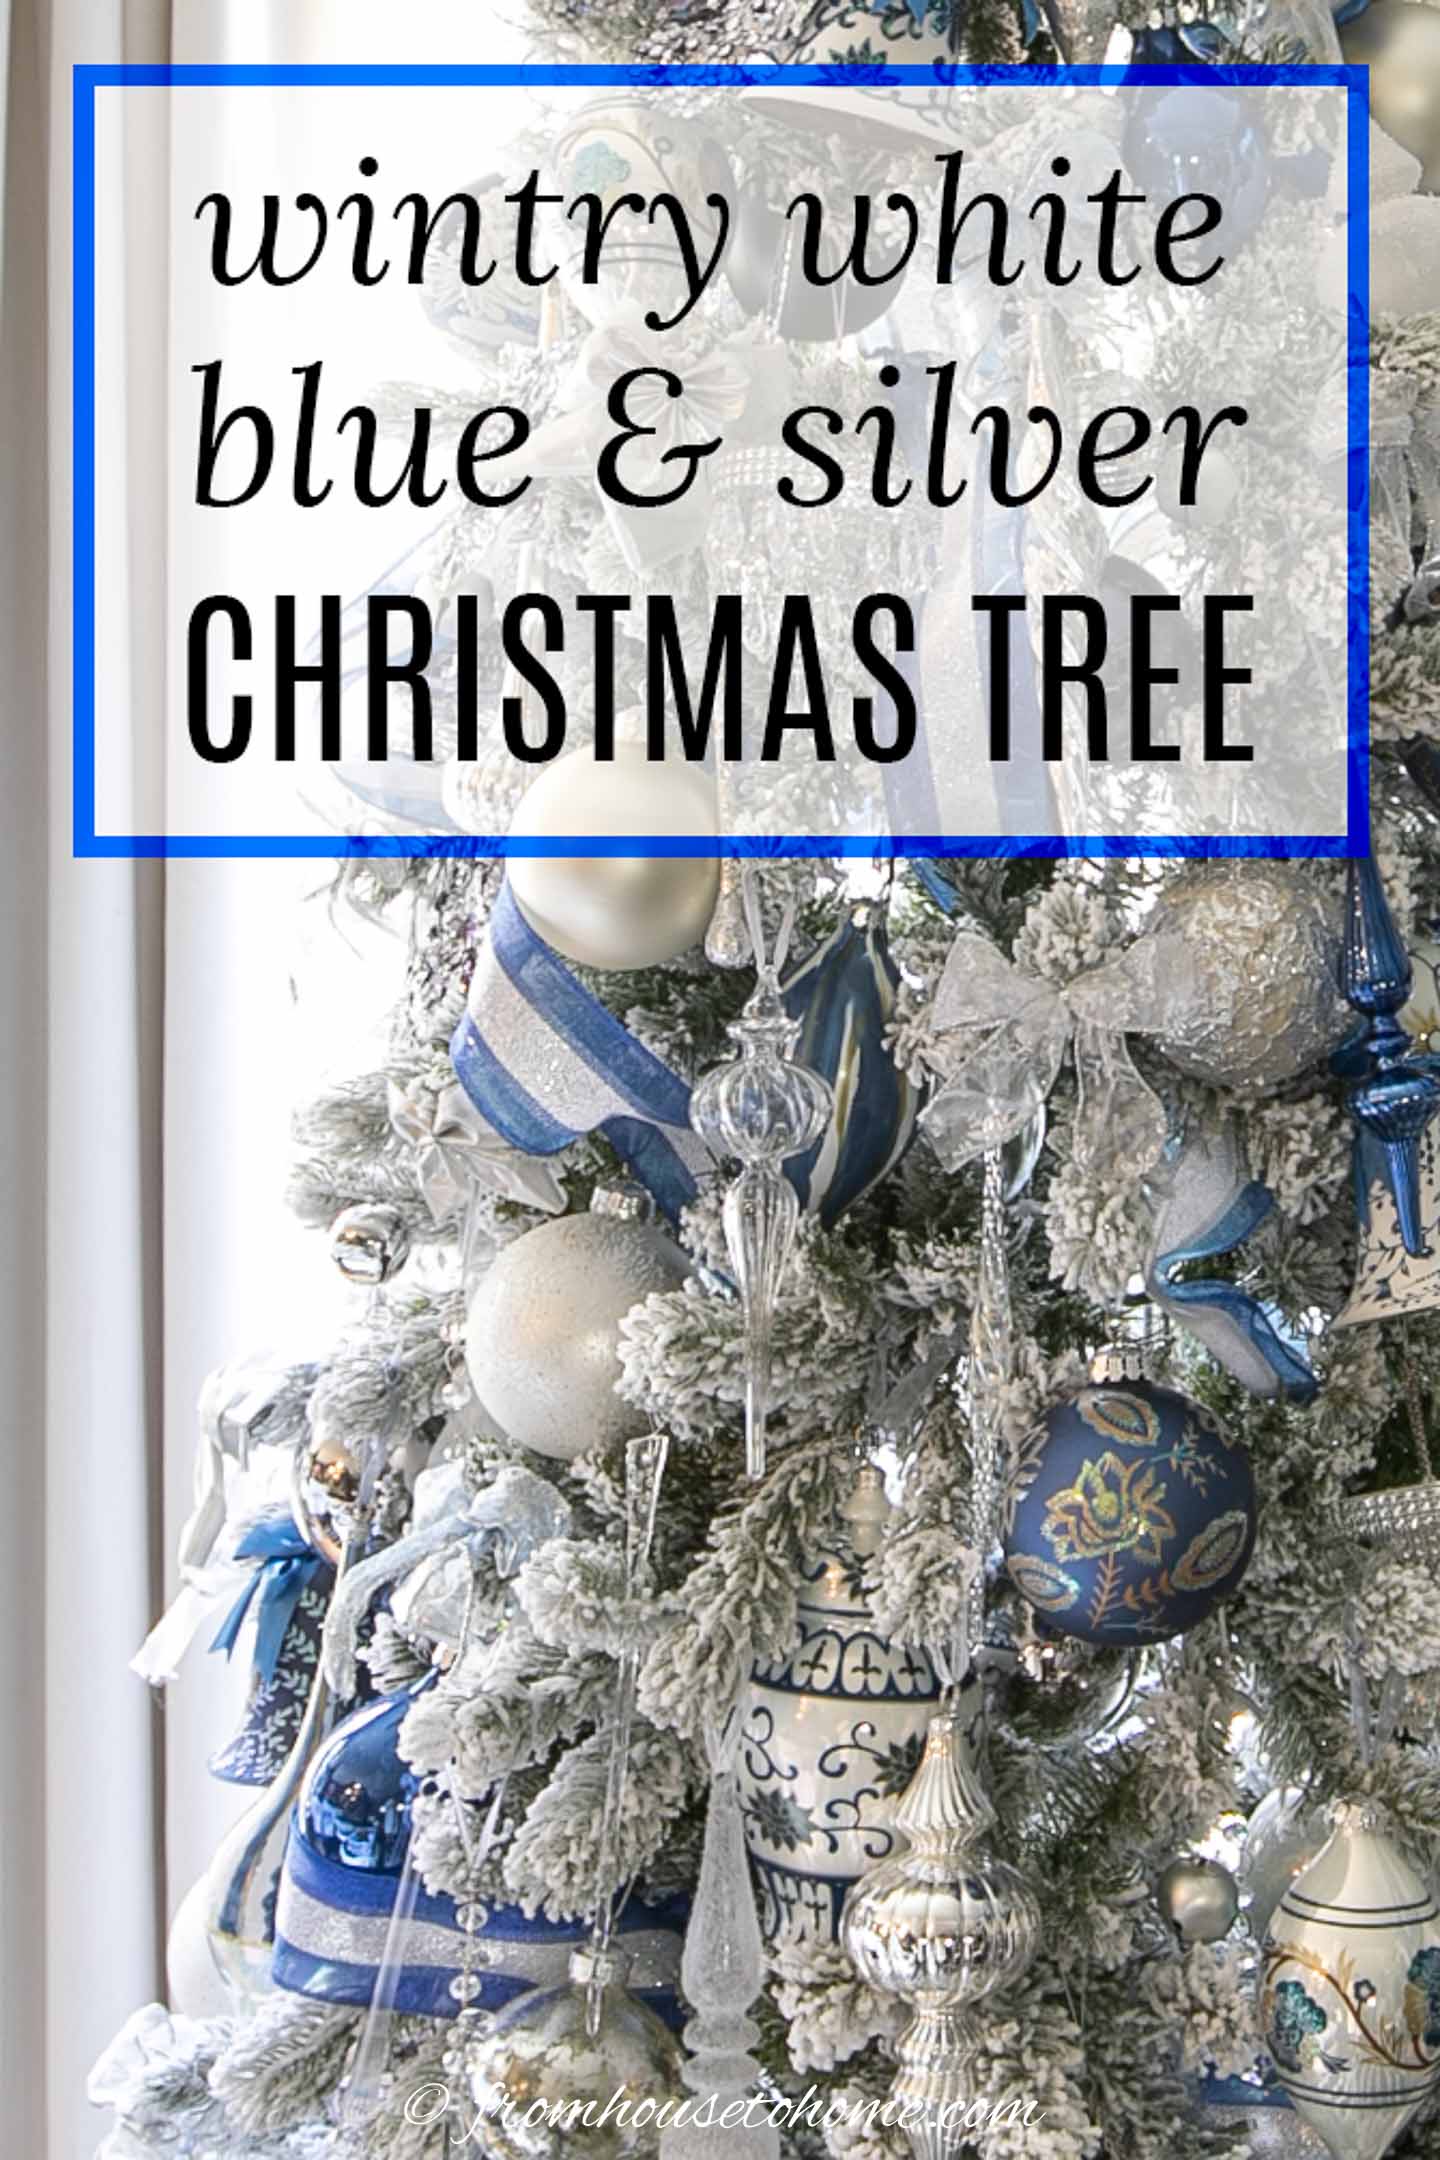 wintry white, blue and silver Christmas tree